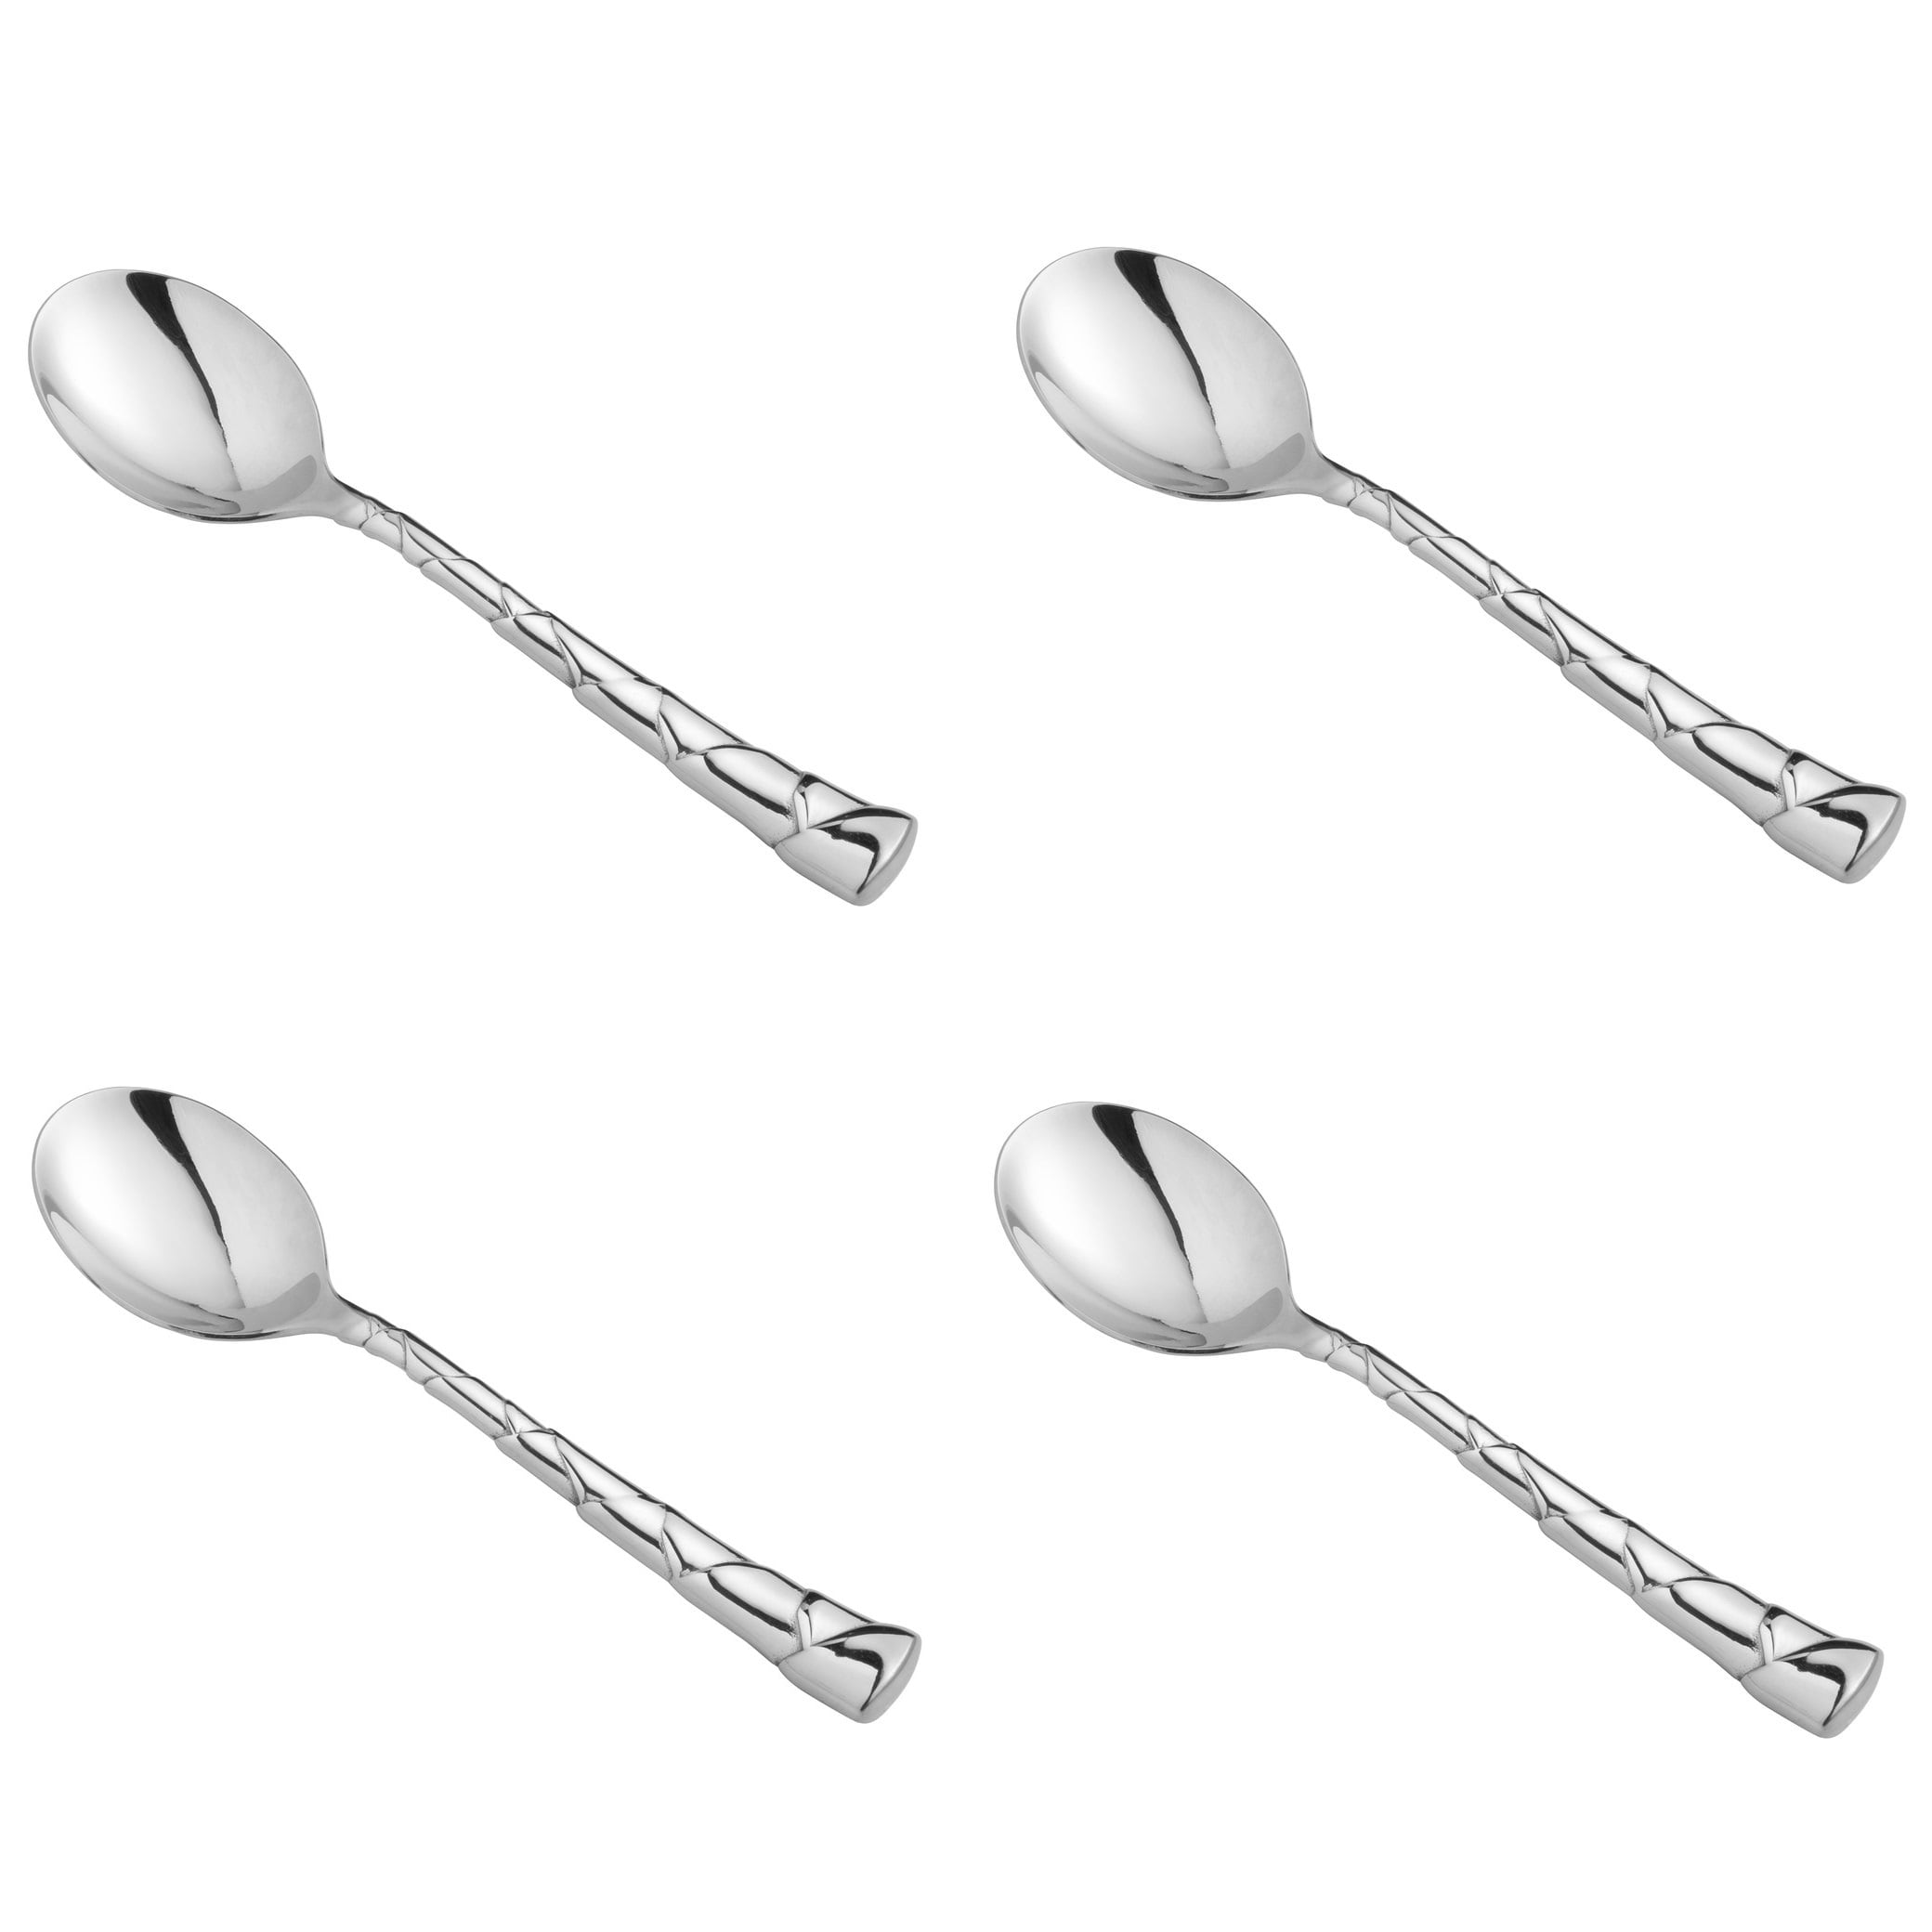 US SELLER  12 ELEGANCE DEMITASSE SPOONS 4" NEW 18/0 STAINLESS FREE SHIP US ONLY 